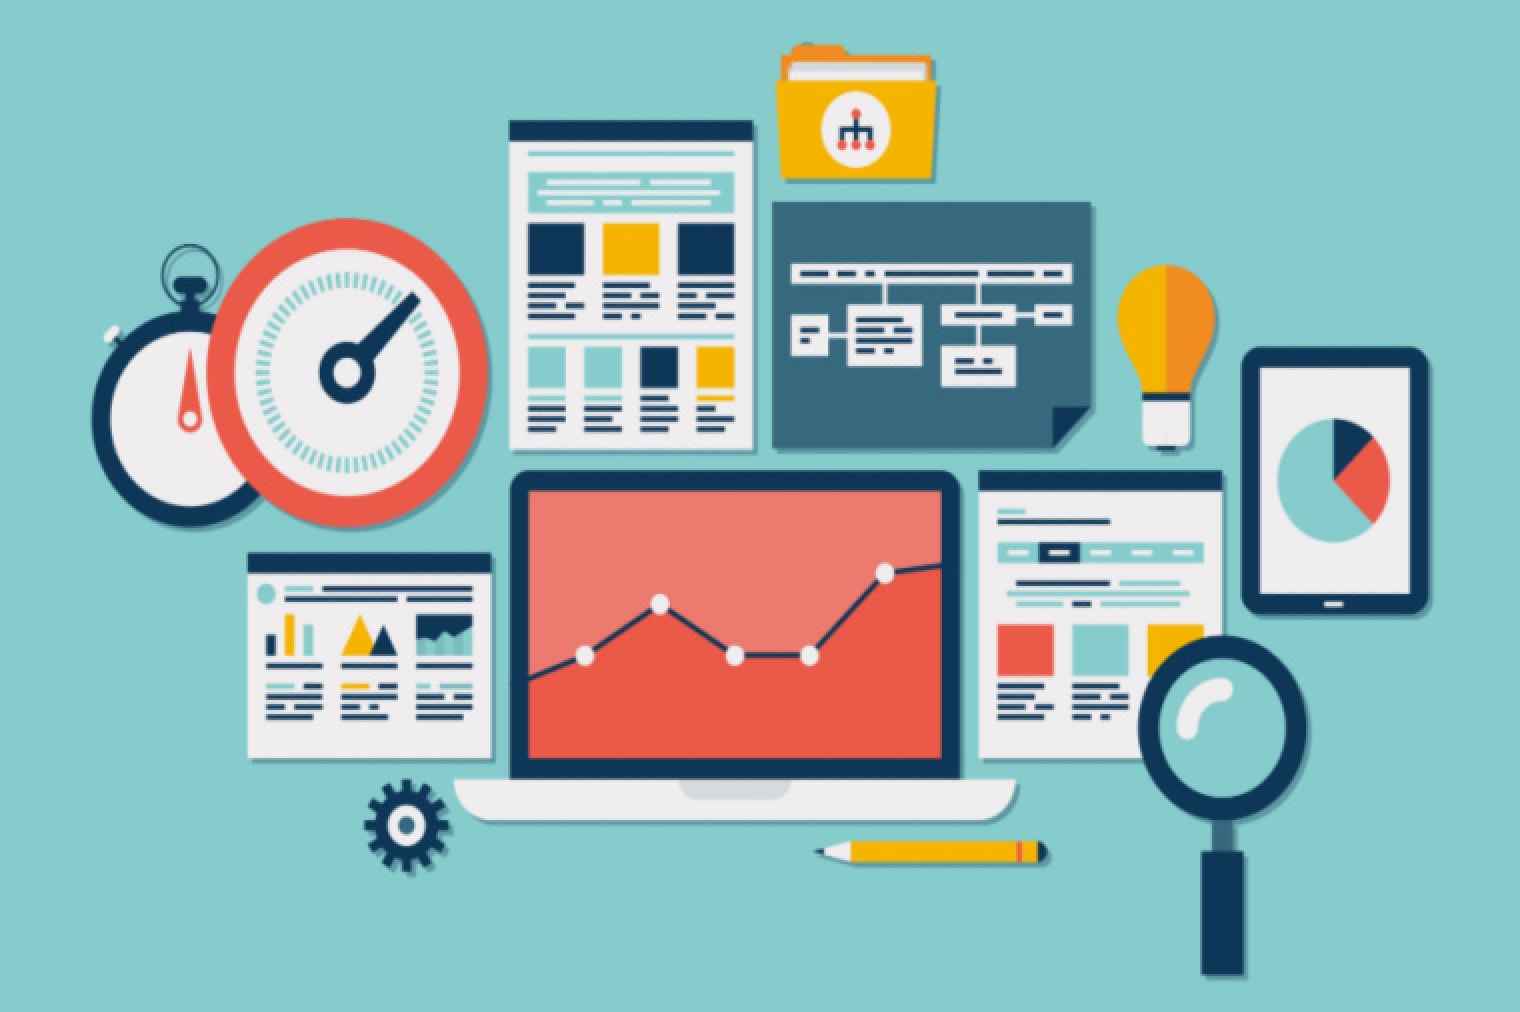 illustration of screens, tools and timers to represent seo